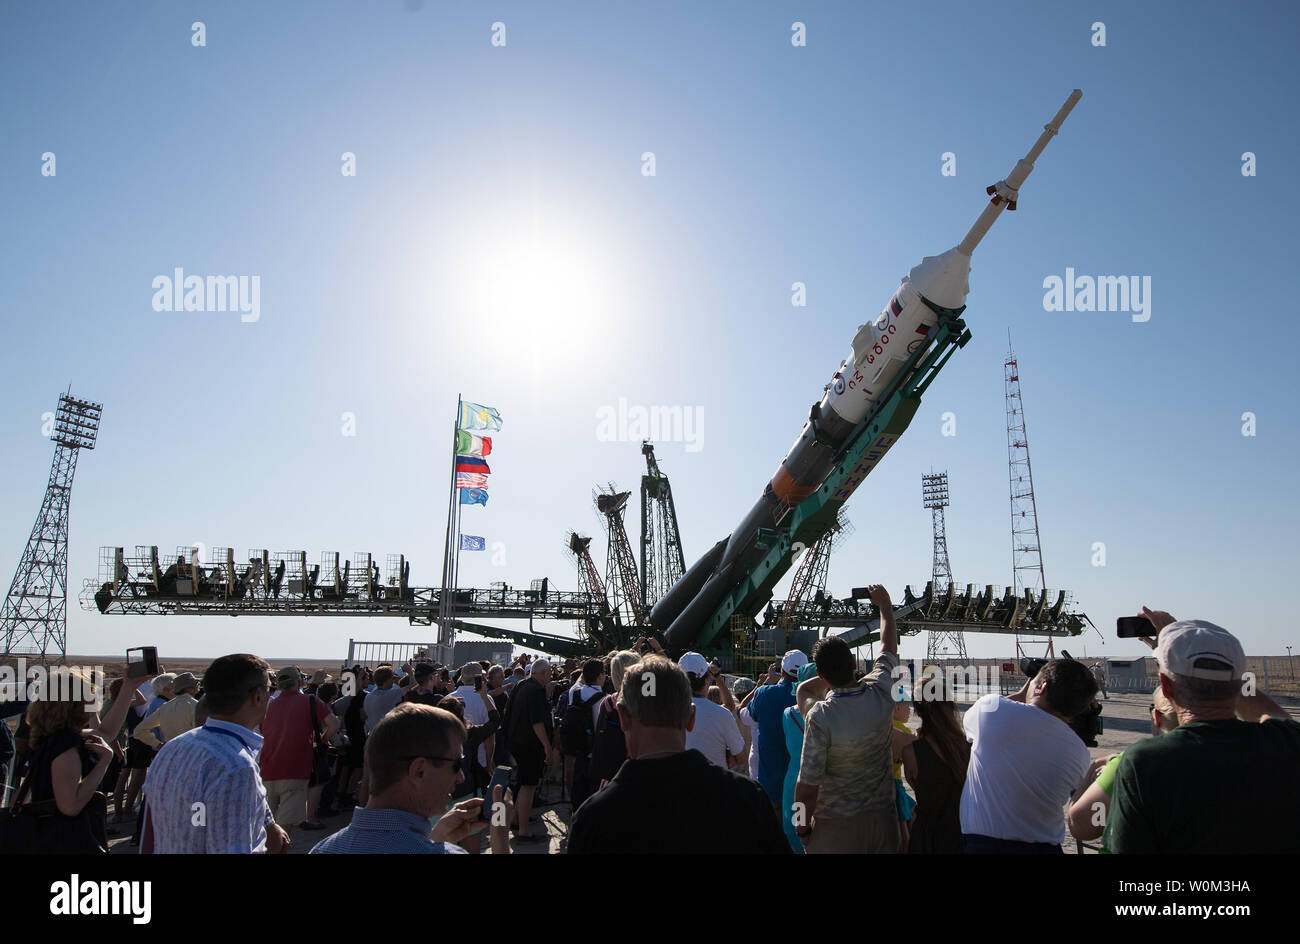 The Soyuz MS-05 spacecraft is seen on the launch pad after being rolled out by train at the Baikonur Cosmodrome, Kazakhstan, on July 26, 2017. Expedition 52 flight engineer Sergei Ryazanskiy of Roscosmos, flight engineer Randy Bresnik of NASA, and flight engineer Paolo Nespoli of ESA (European Space Agency), are scheduled to launch to the International Space Station aboard the Soyuz spacecraft from the Baikonur Cosmodrome on July 28. NASA Photo by Joel Kowsky/UPI Stock Photo